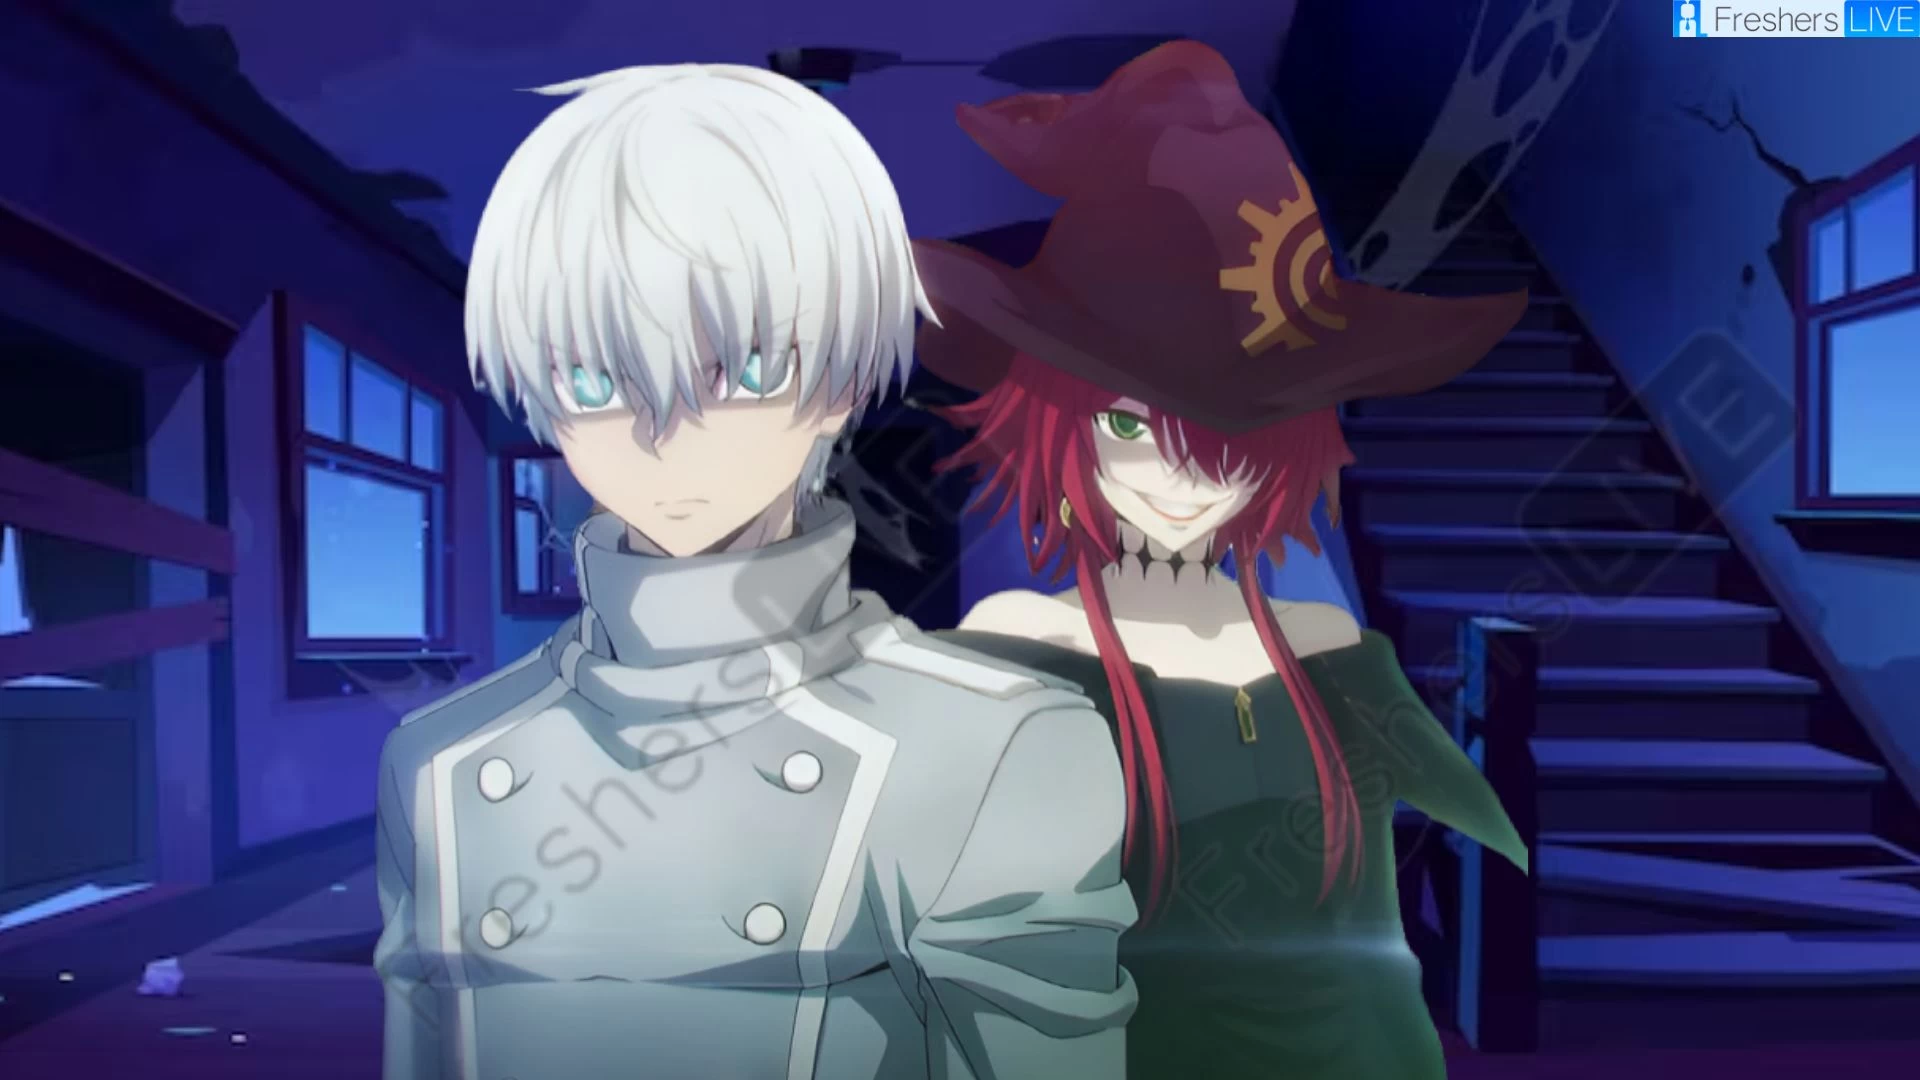 Ragna Crimson Season 1 Episode 2 Release Date and Time, Countdown, When is it Coming Out?